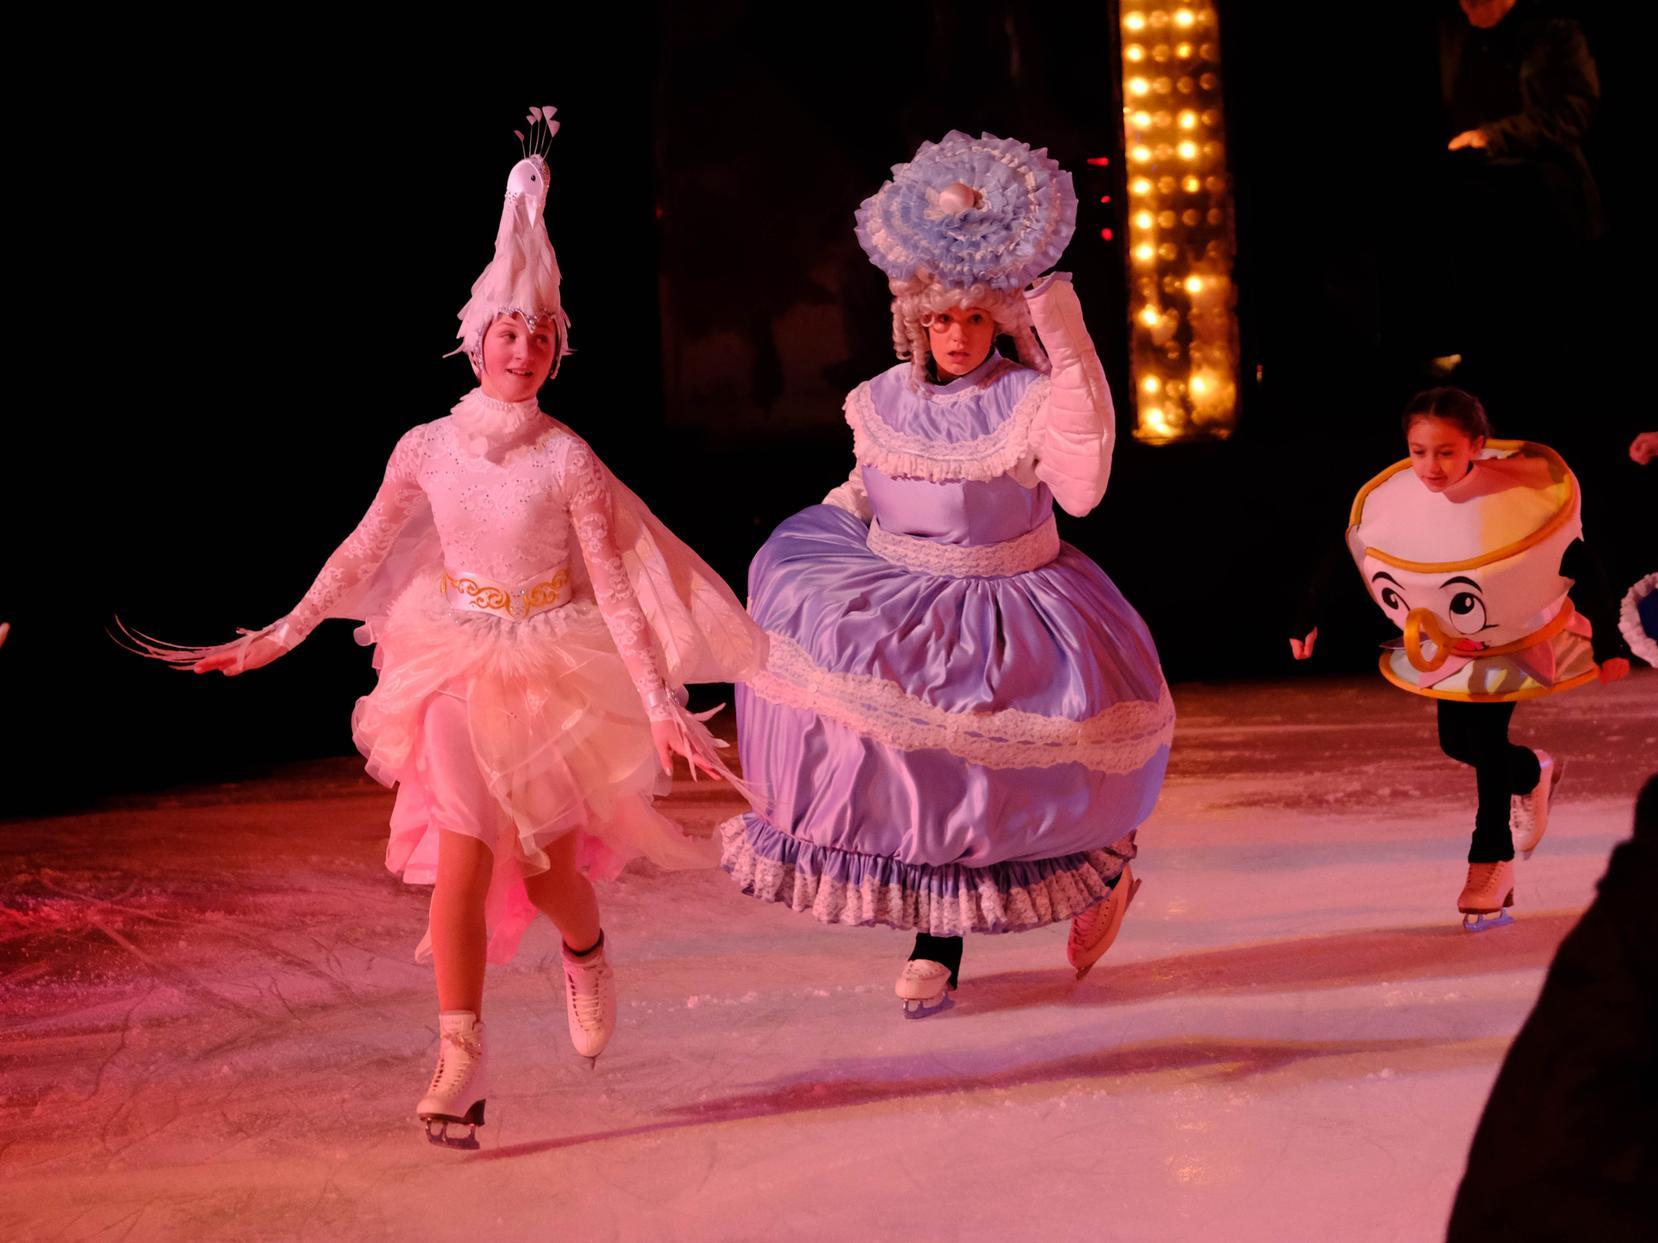 Ice skating coach and Hot Ice cast member David Walsingham has produced and choreographed the show.